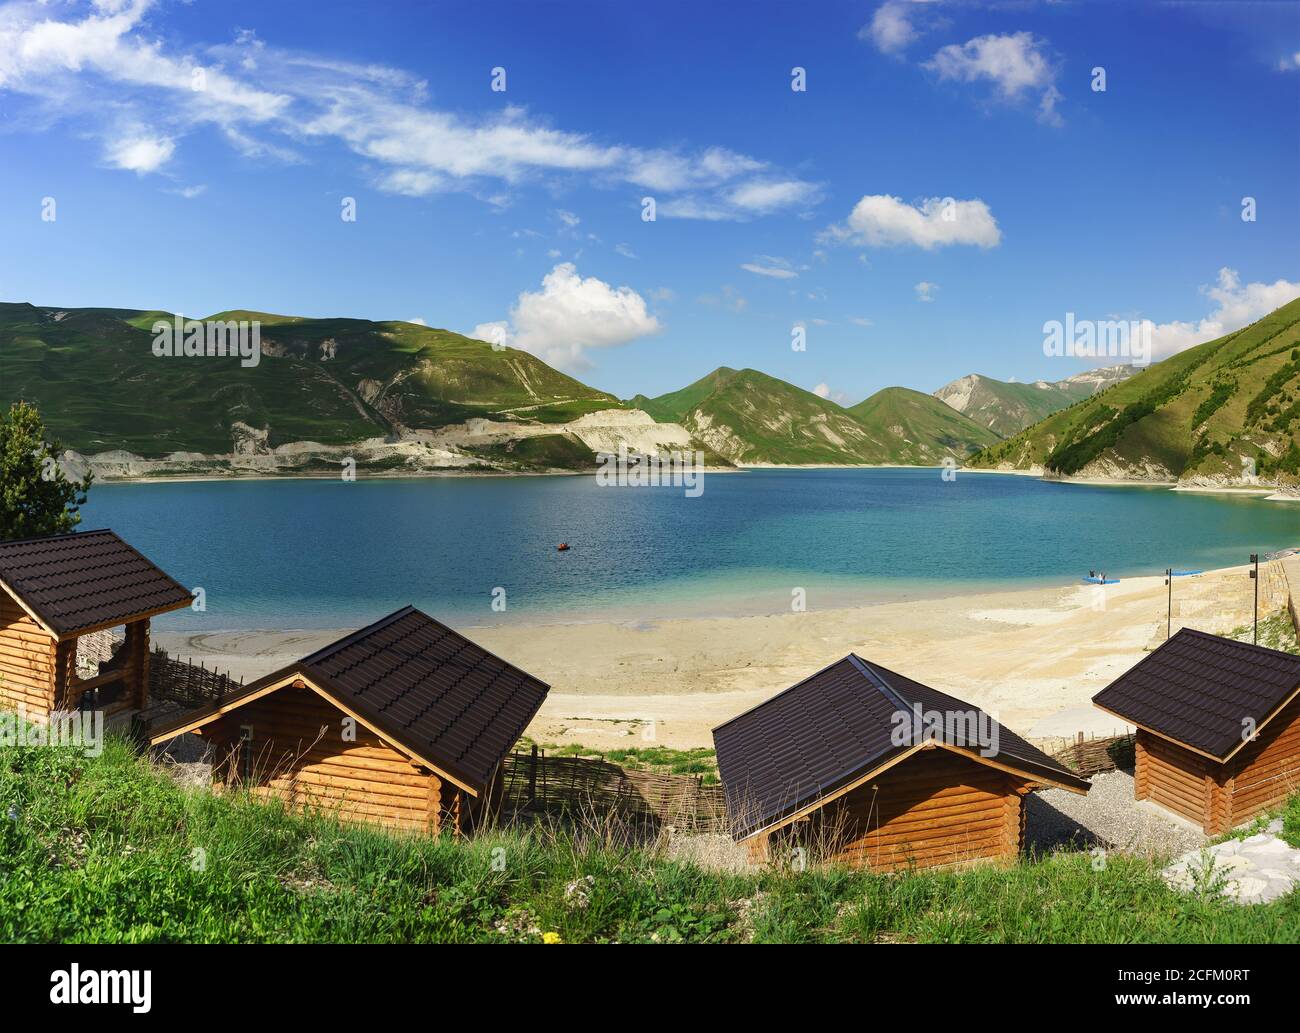 Vedensky district, Chechen Republic, Russia - June 01, 2019: Gazebos for rest on the shore of the high-mountain lake Kezenoi Am. Weekend in early summ Stock Photo